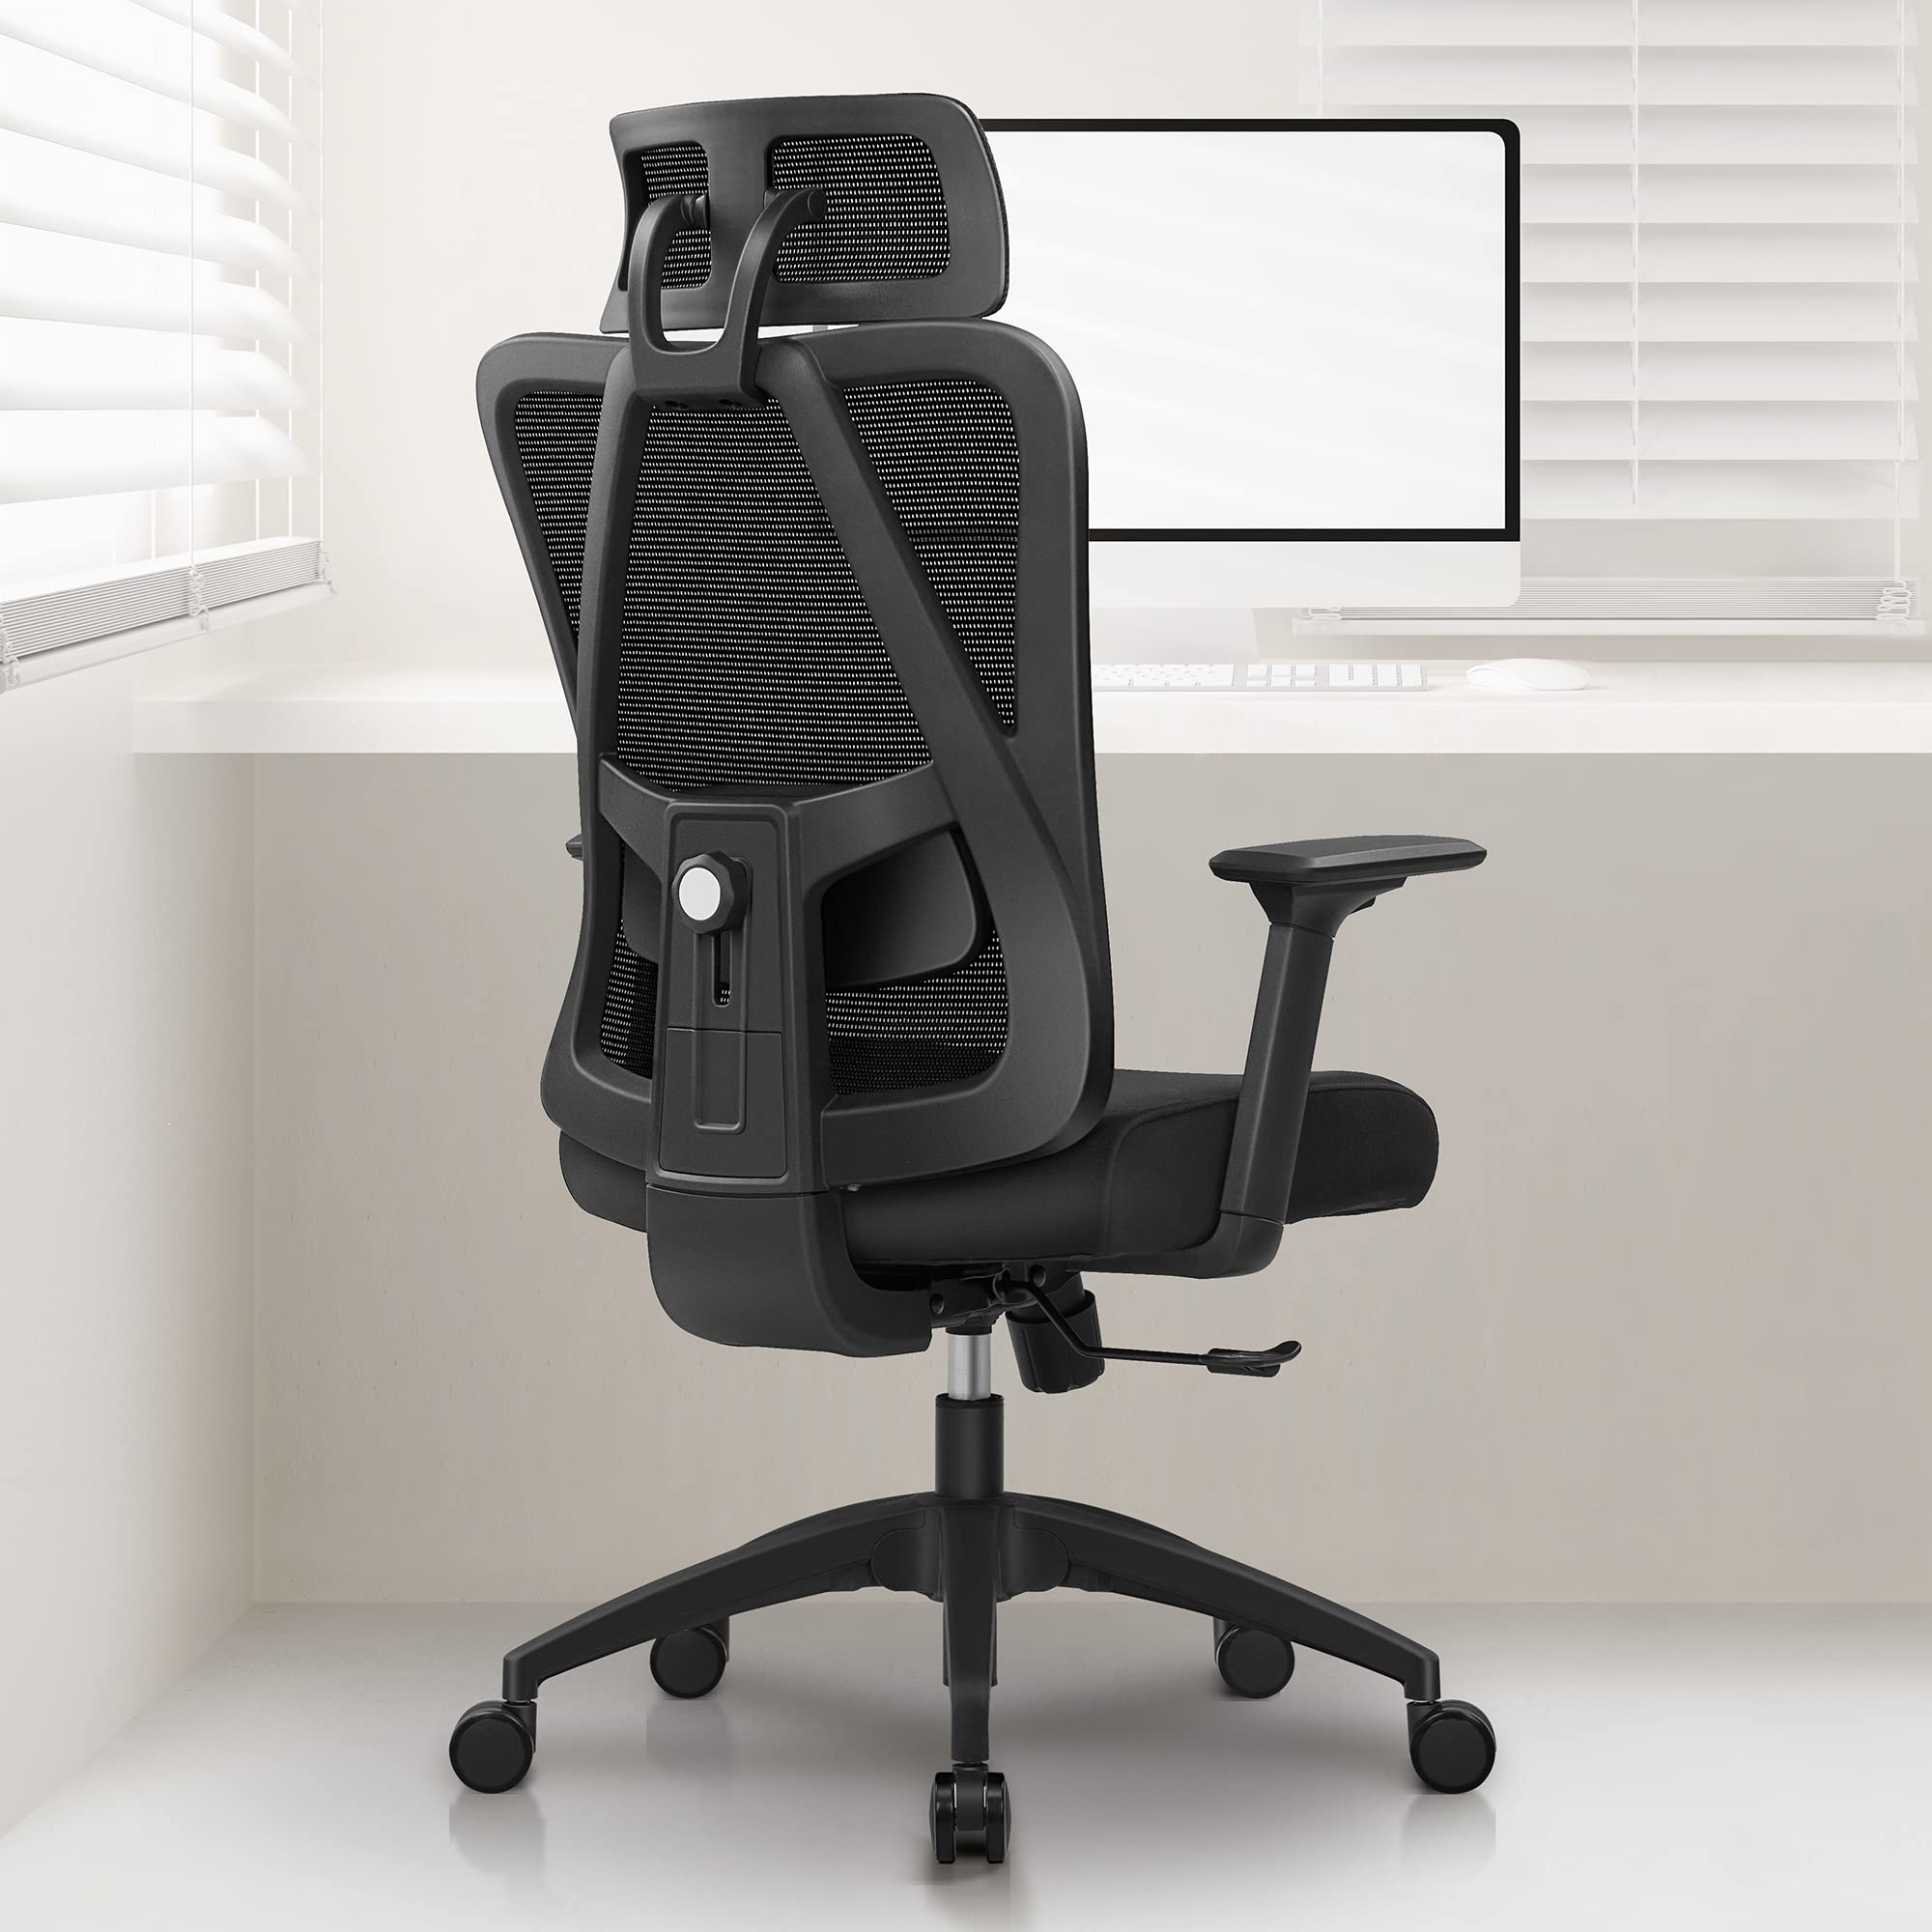 Ergonomic Mesh Adjustable High Back Office Chair with Lumbar Support-Black